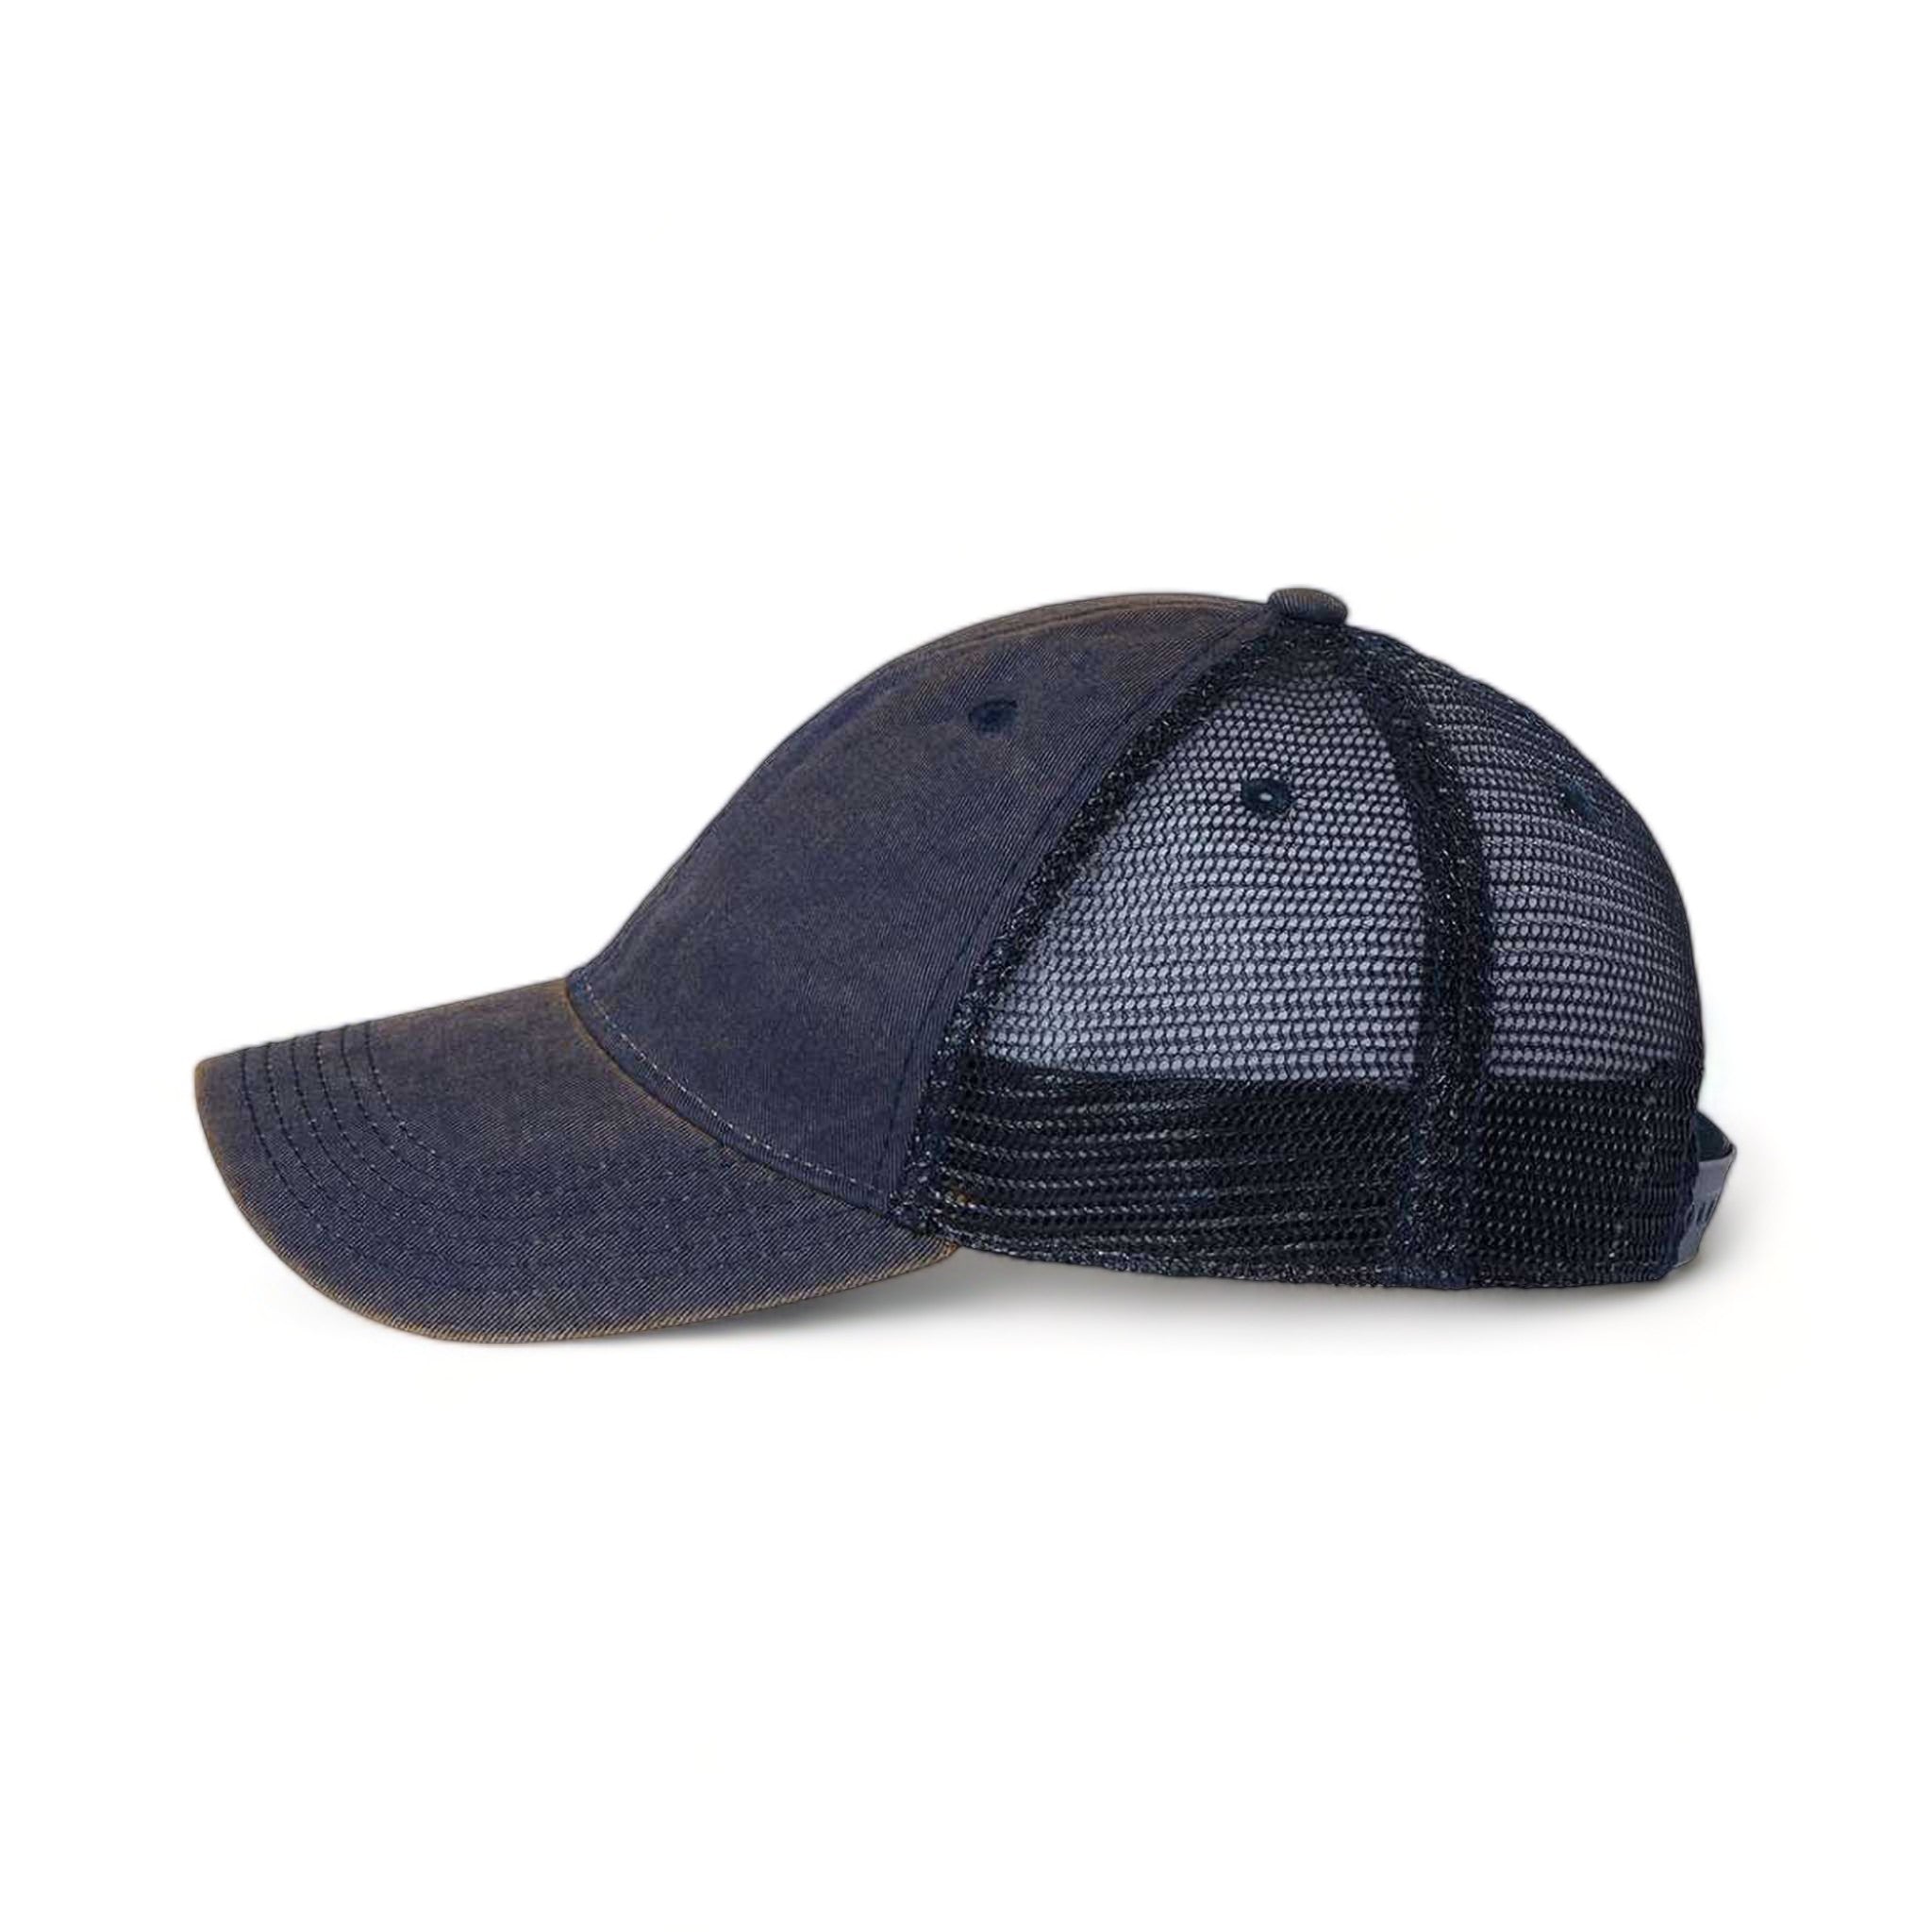 Side view of LEGACY OFA custom hat in navy and navy